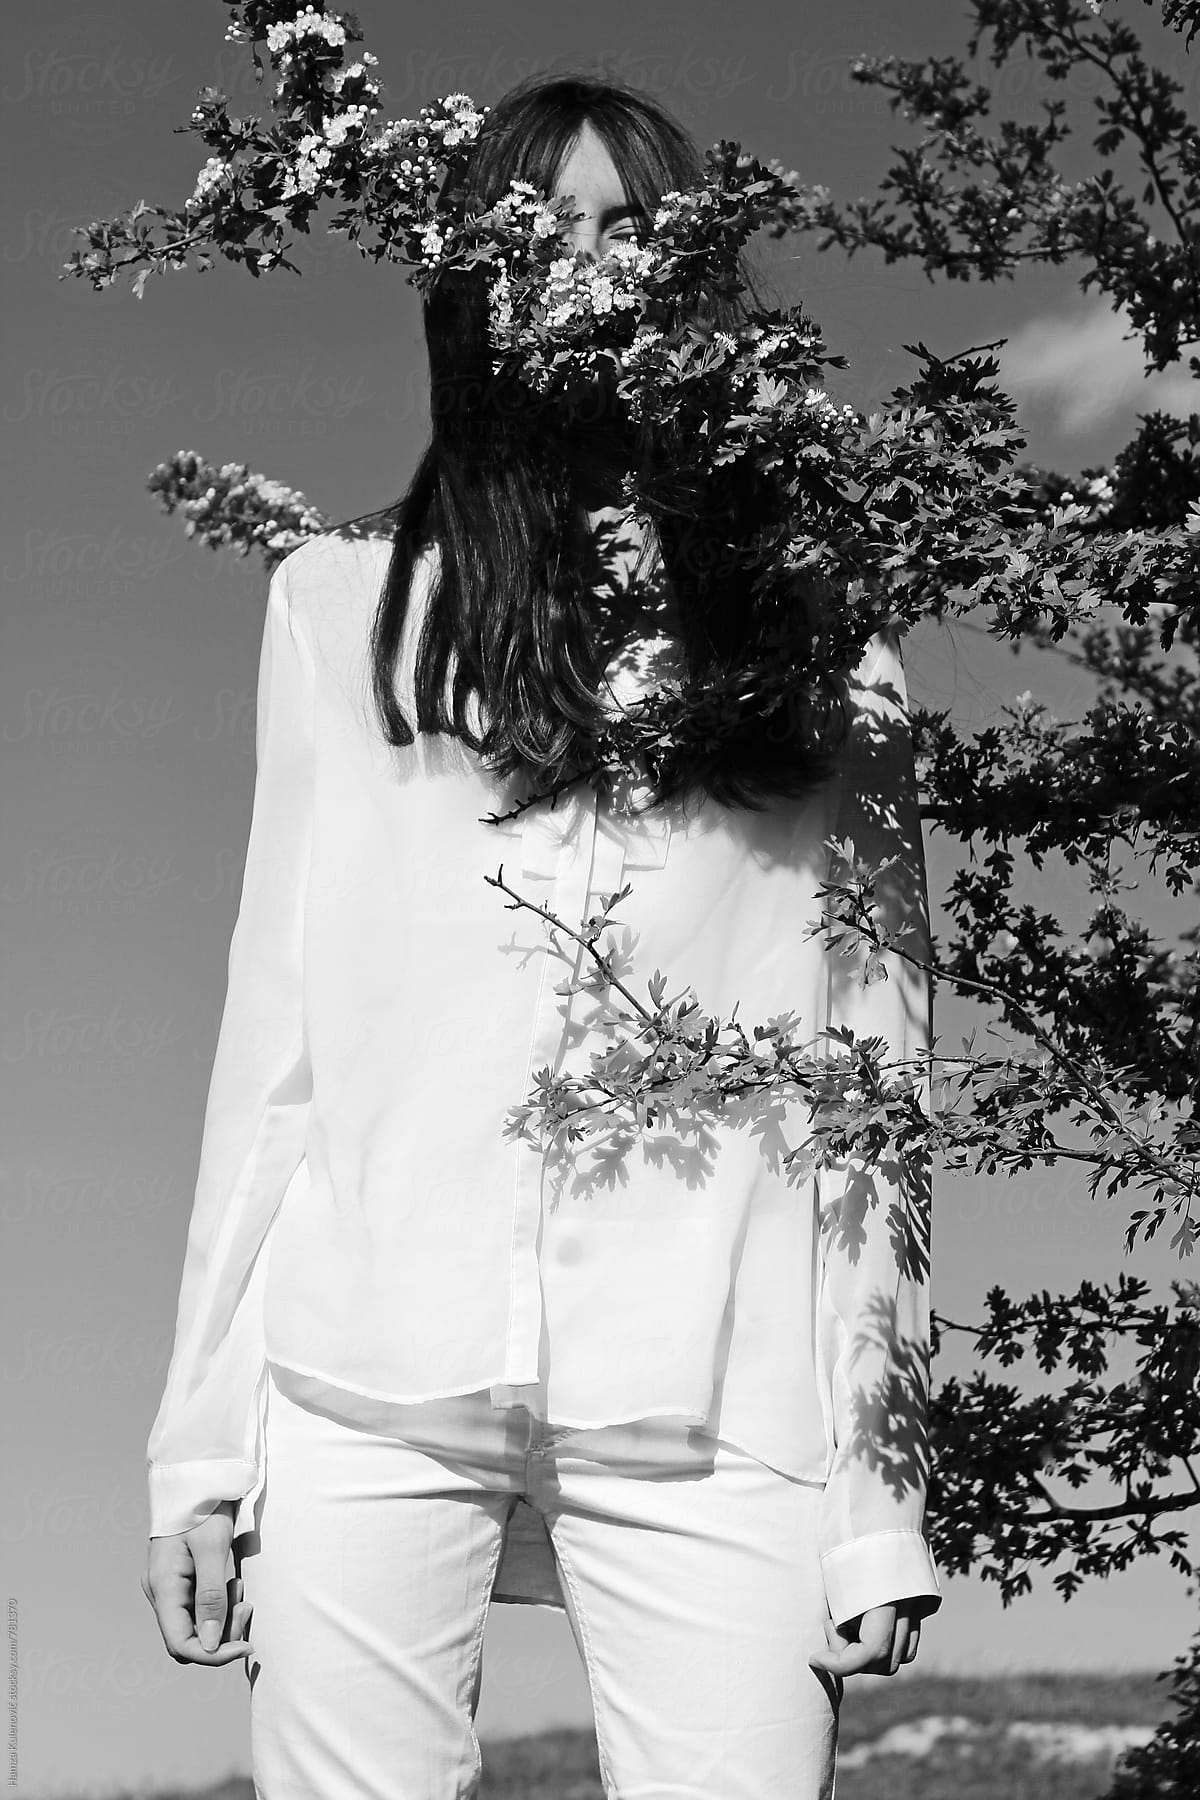 Artistic Black And White Photo Of A Girl Wearing White Clothes In Nature By Stocksy